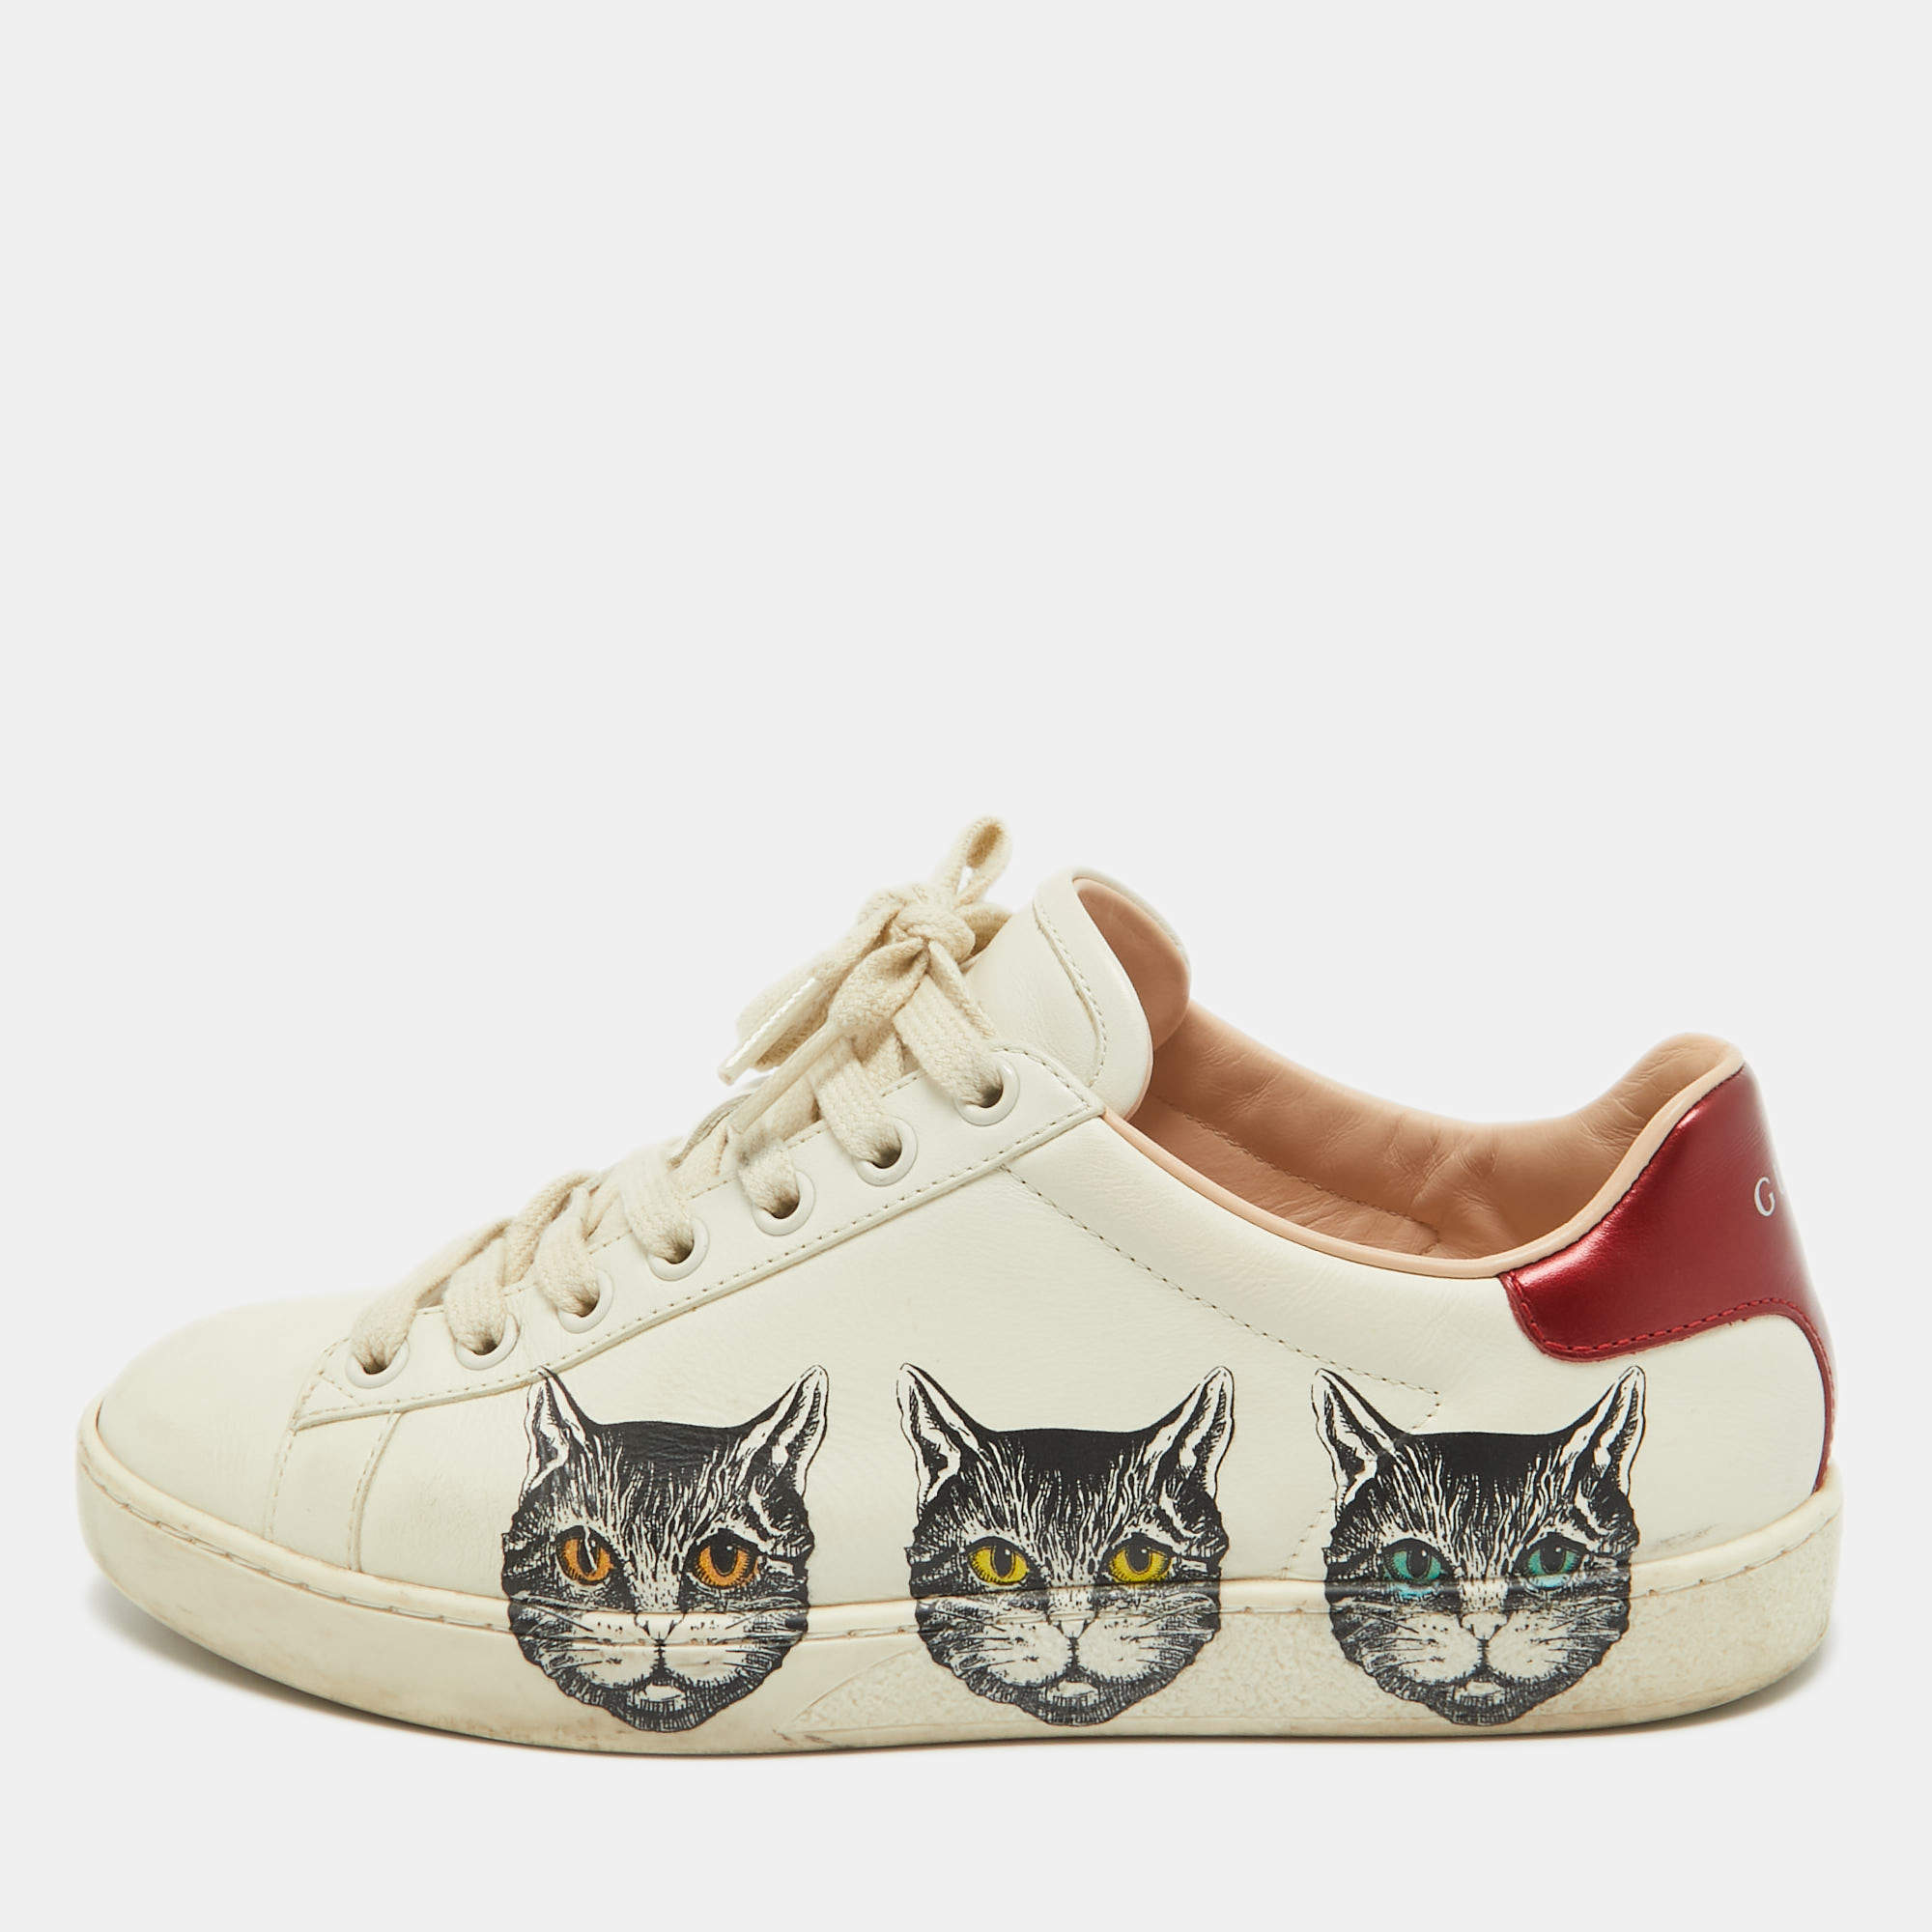 Gucci Off White Leather Mystic Cat Ace Sneakers Size 37